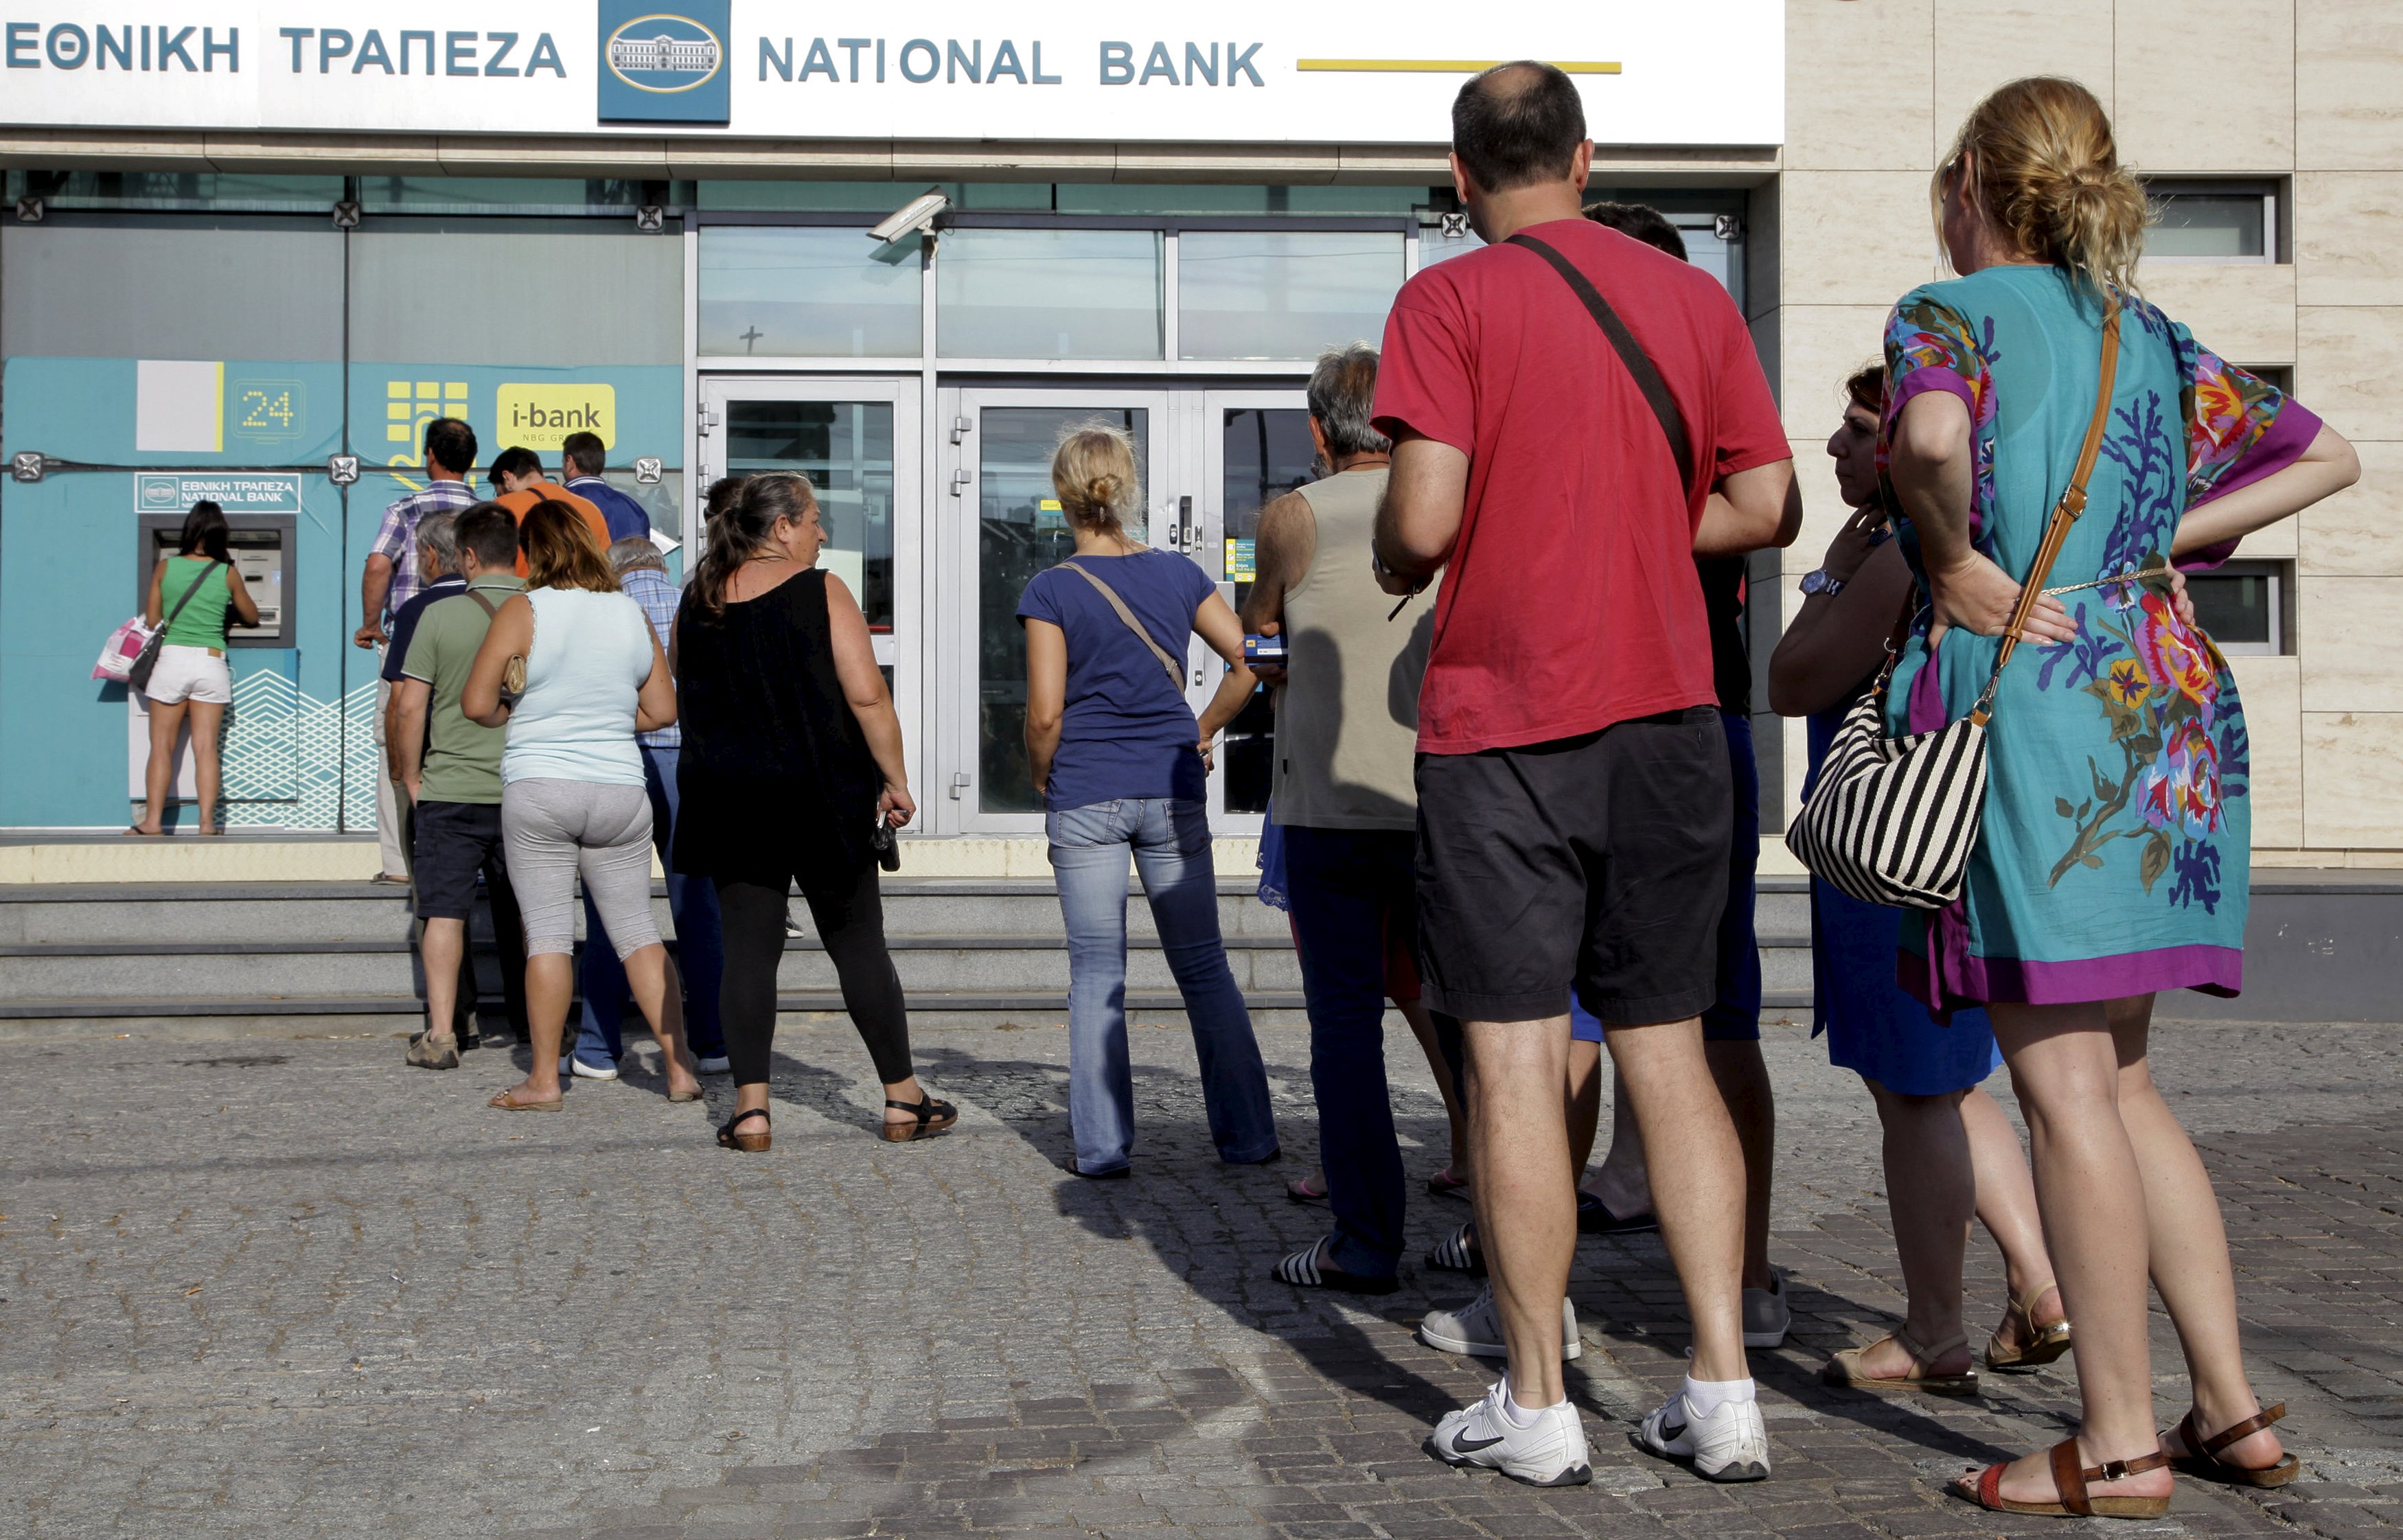 People line up to withdraw cash from an automated teller machine (ATM) outside a National Bank branch in Iraklio on the island of Crete, Greece June 28, 2015. Greece's Prime Minister Alexis Tsipras on Sunday announced a bank holiday and capital controls after Greeks responded to his surprise call for a referendum on bailout terms by pulling money out of banks. REUTERS/Stefanos Rapanis